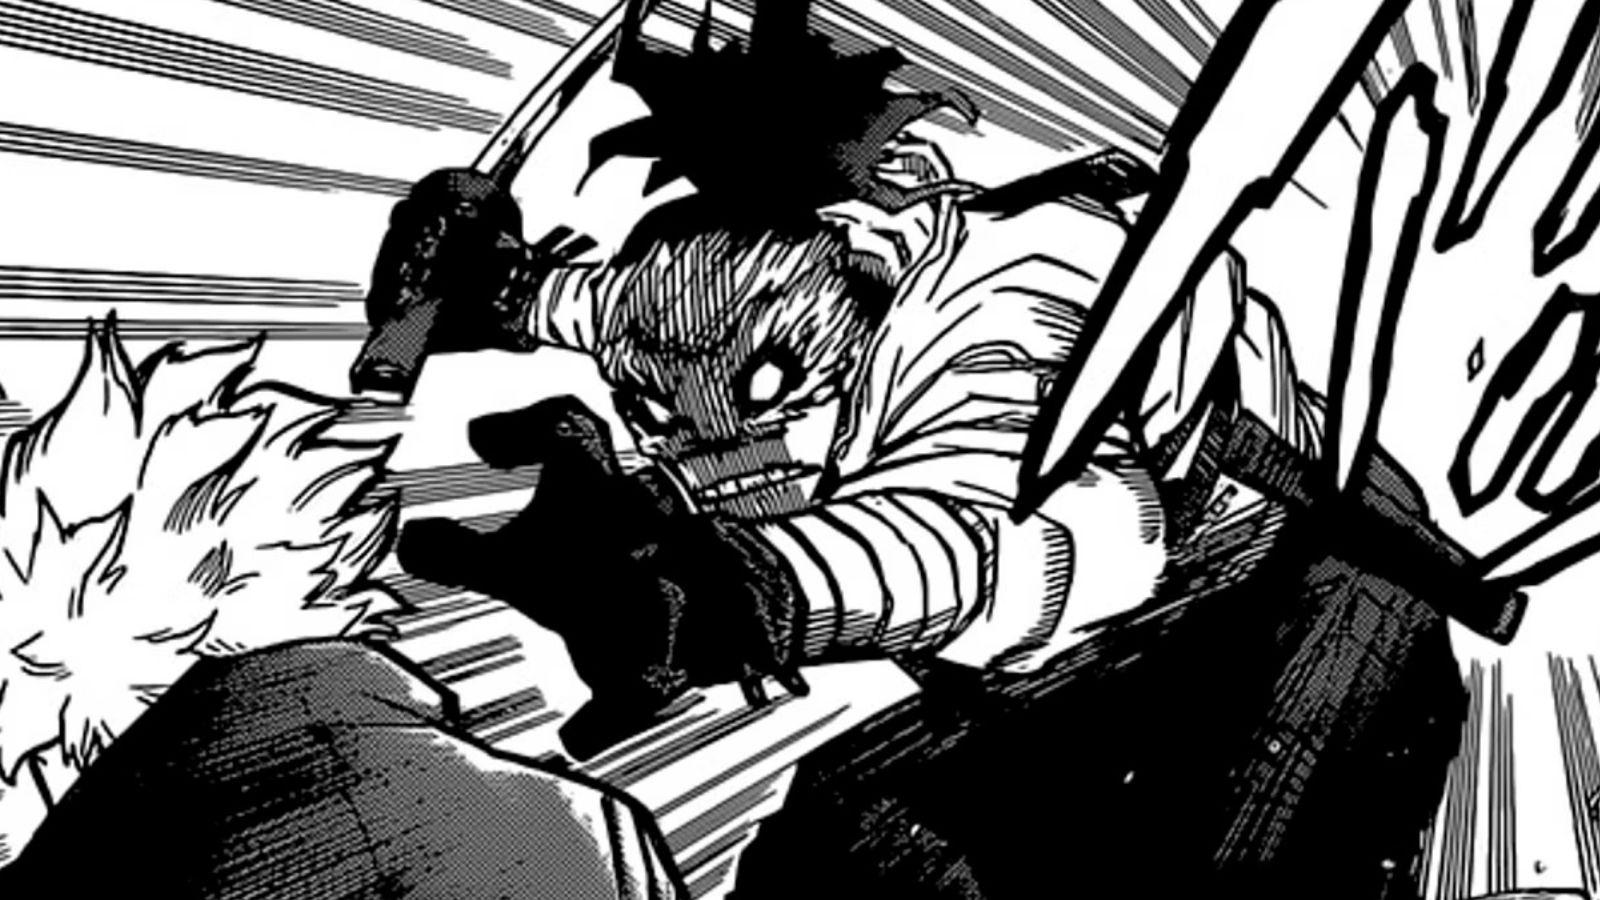 A panel from My Hero Academia